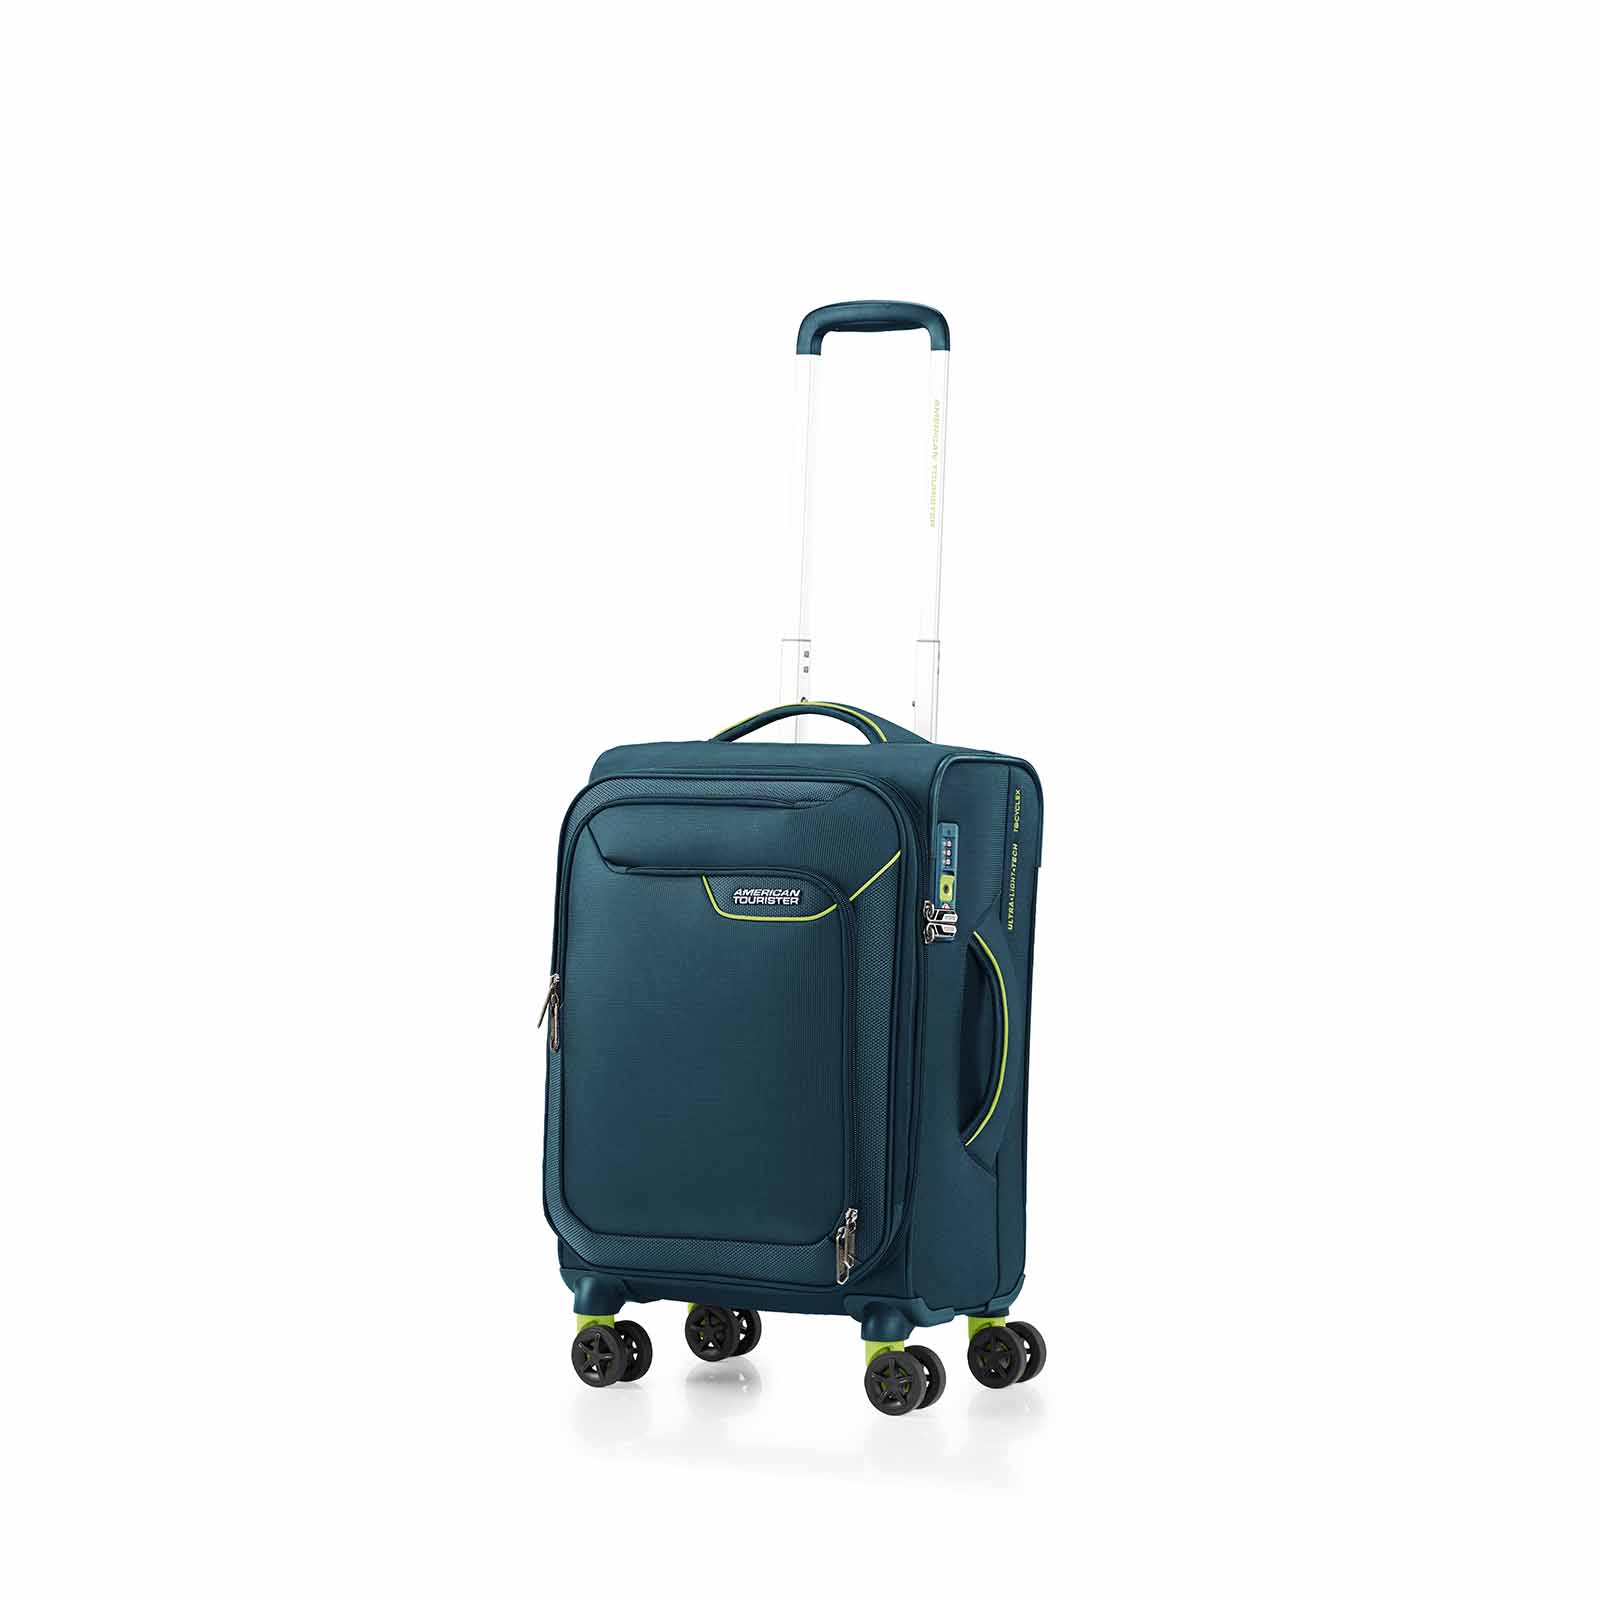 American-Tourister-Applite-4-Eco-55cm-Carry-On-Suitcase-Varsity-Green-Angle